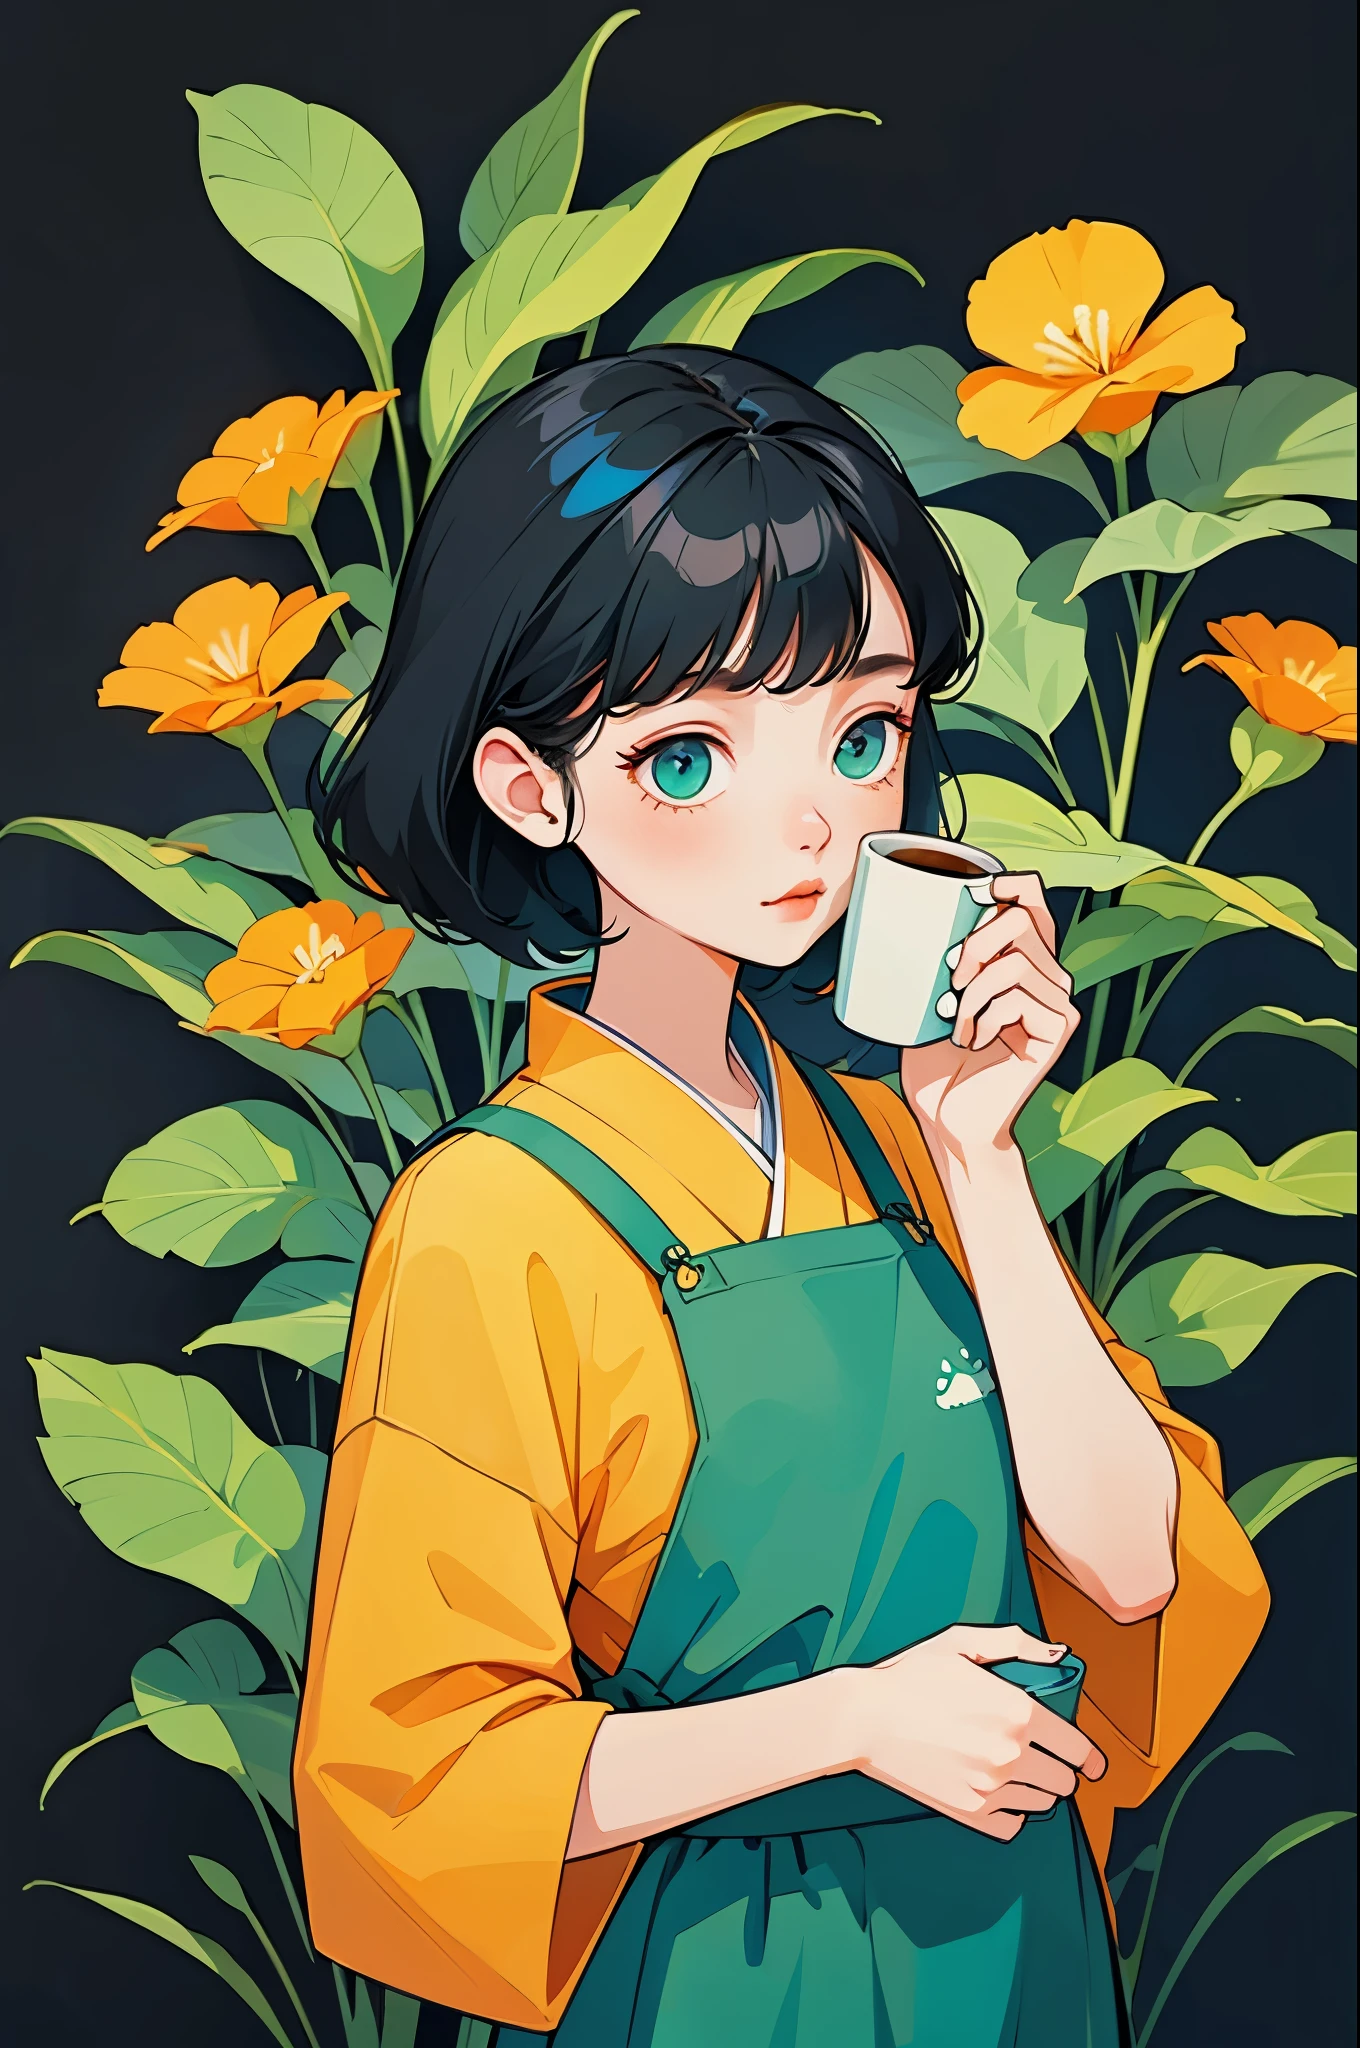 yxycolor，girl ，coffee cup，Cat，black hair，Simple drawing、green，Blue，orange collustration，green plants，A small number of flowers，clean background